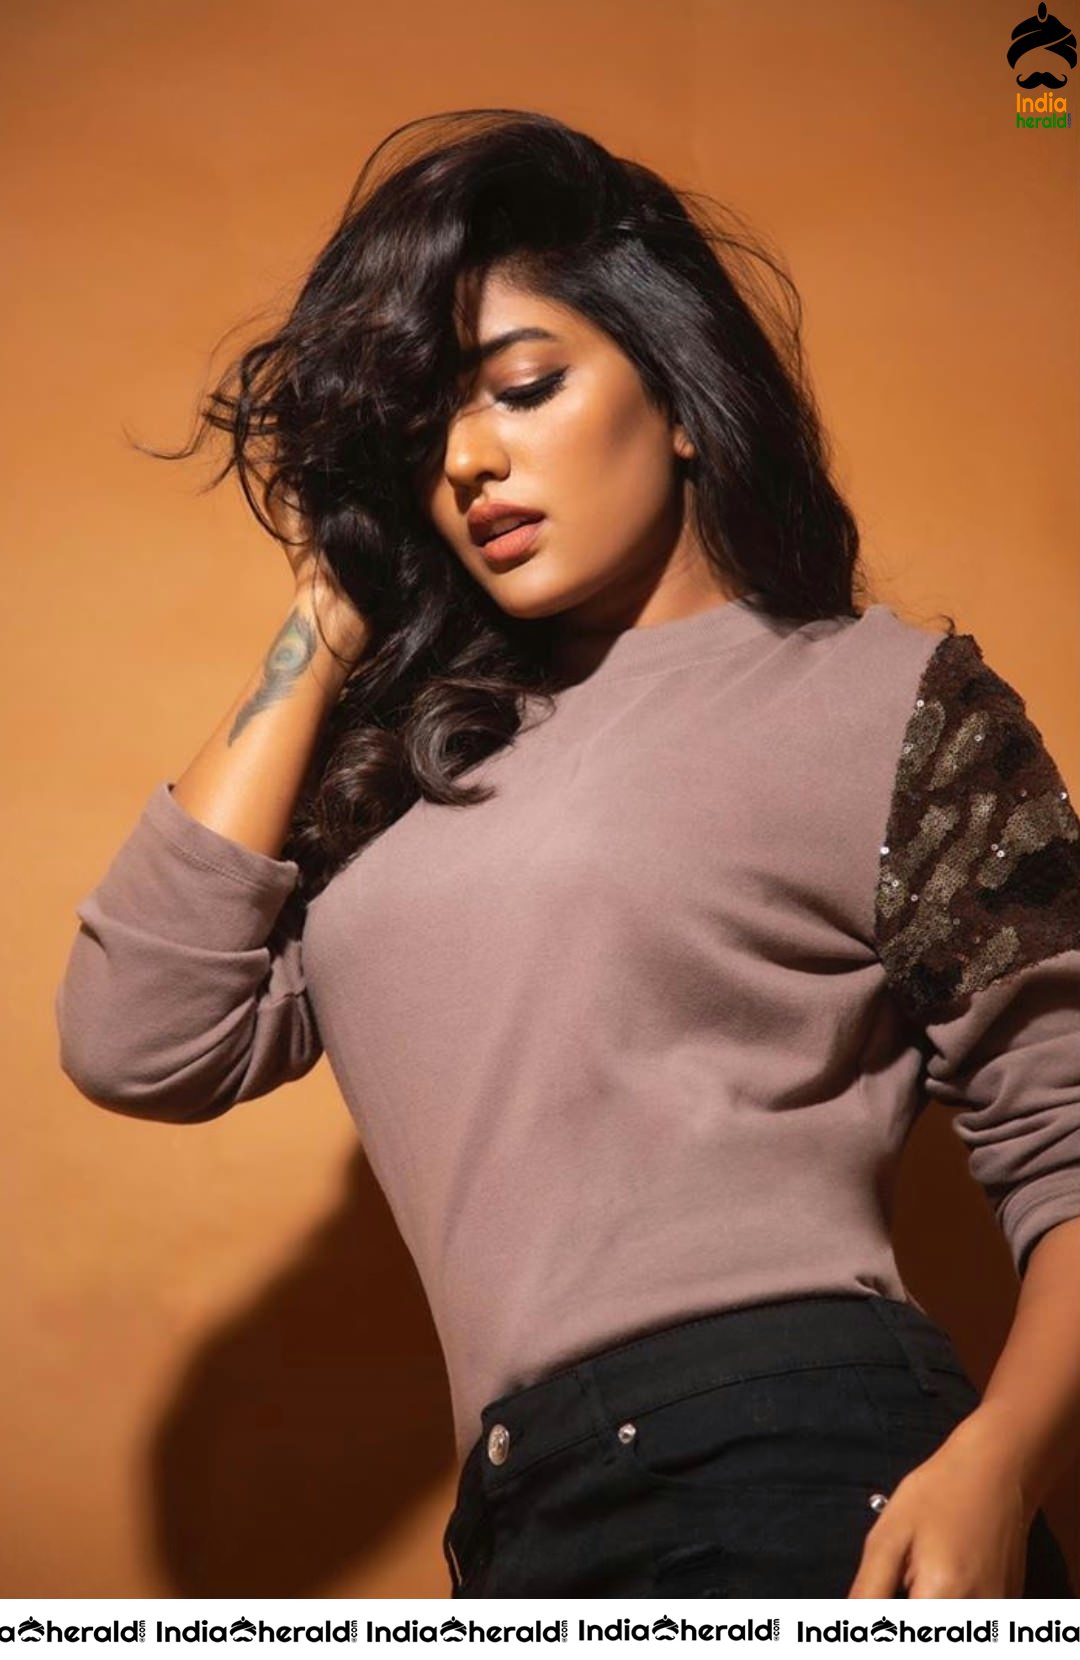 Dusky Babe Eesha Rebba Oozes Hotness in this Latest Shoot